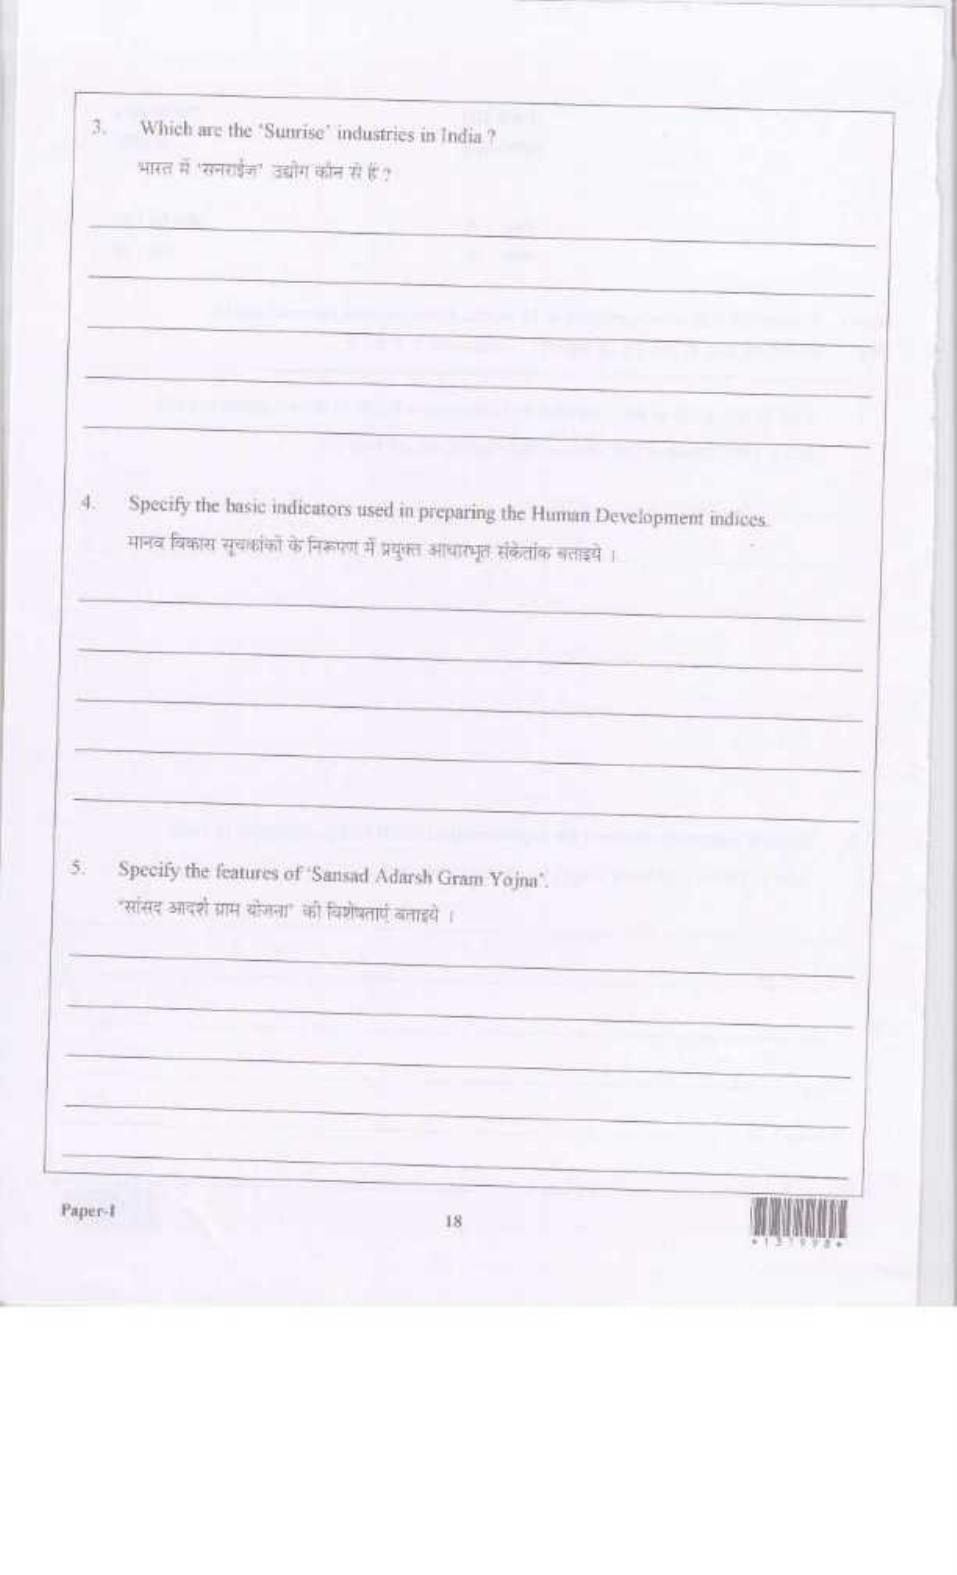 LUVAS Non-Teaching Sample Papers - Socio-Economic and Experience - Page 20